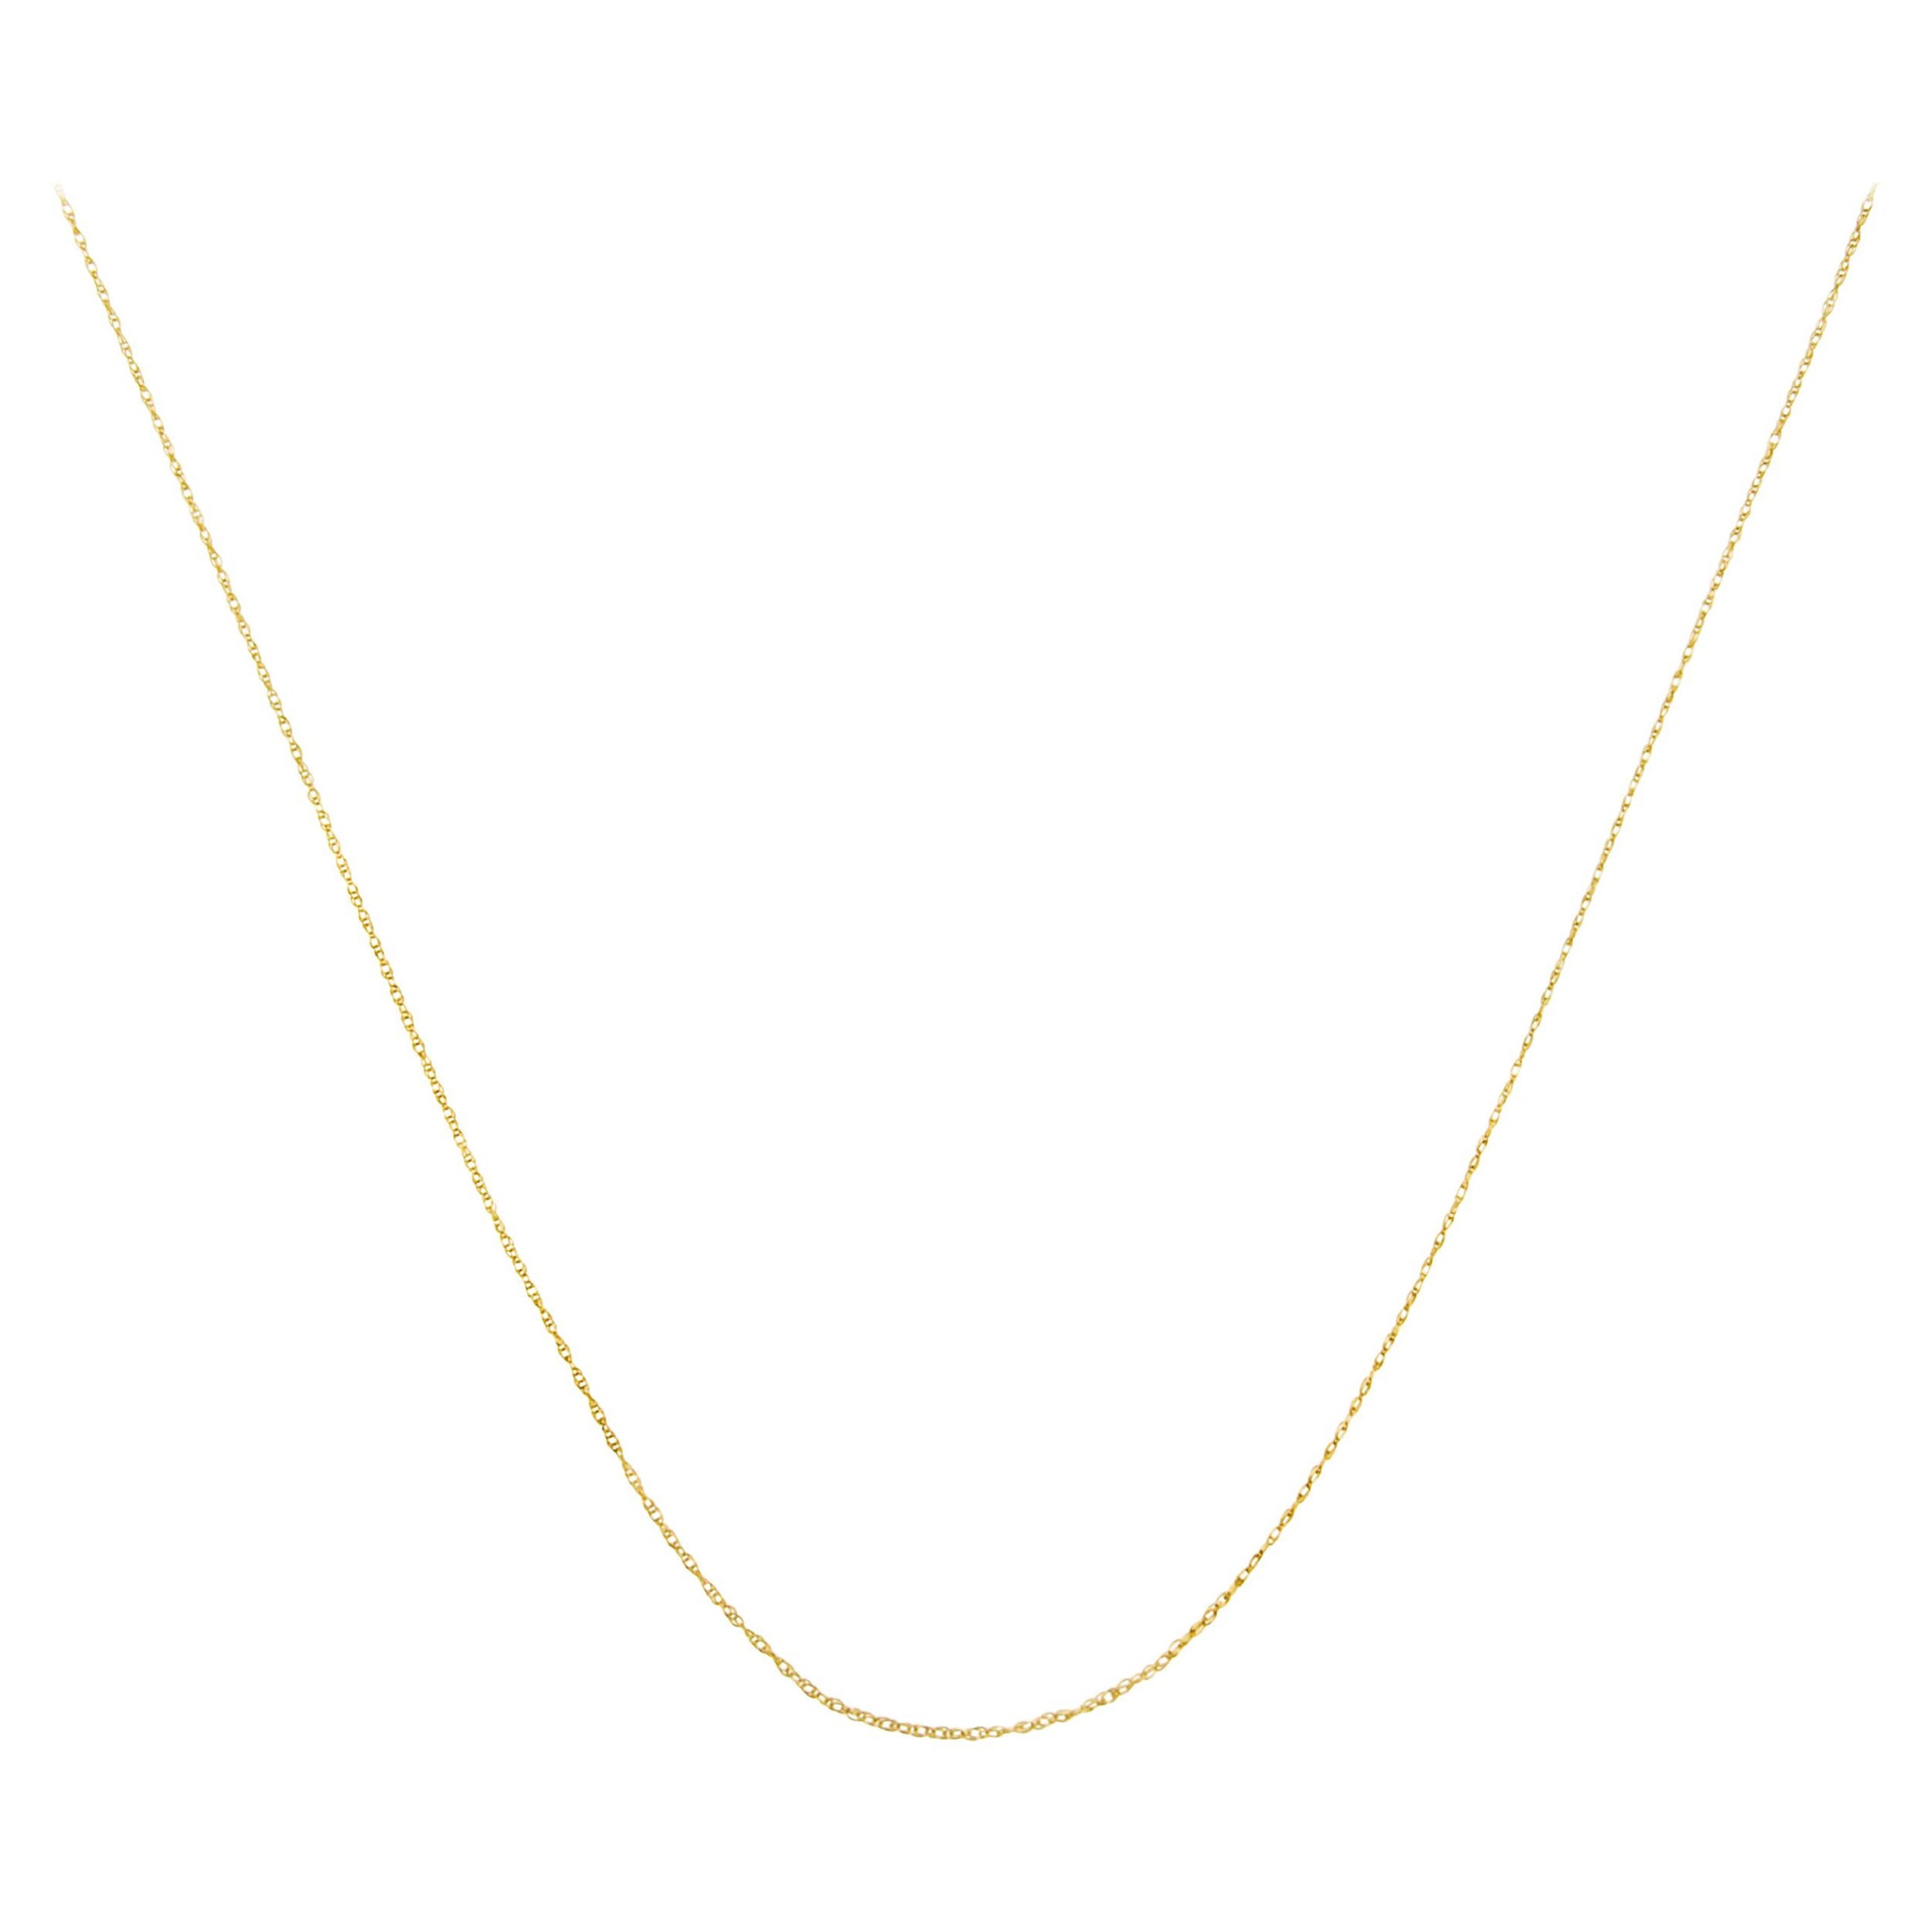 Unisex Solid 10K Yellow Gold Slim and Dainty Rope Chain Necklace